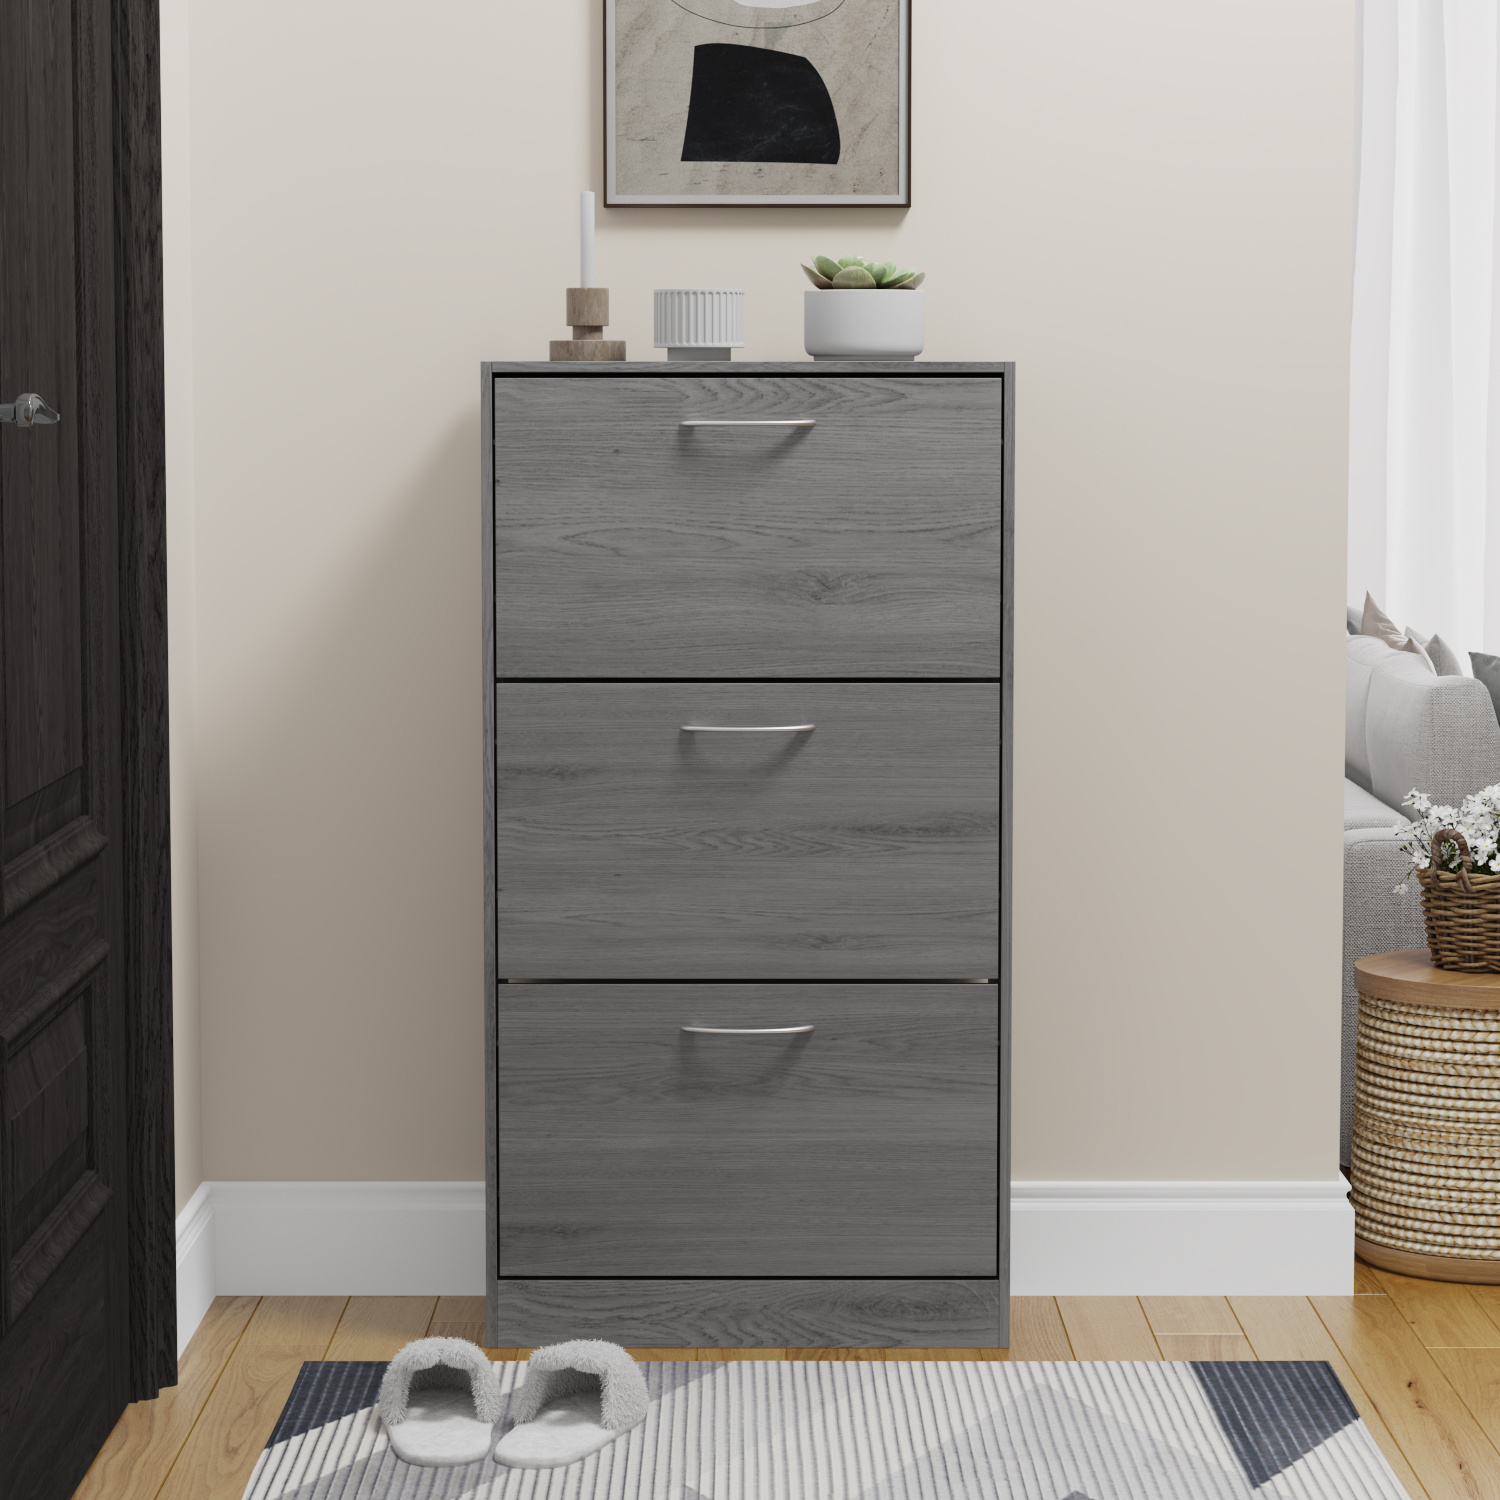 

Shoe Cabinet With 3 Flip Drawers, Modern Shoe Storage Cabinet For Entryway, Freestanding Shoe Rack For Small Space (22.4 W X 9.4 D X 42.1 H)